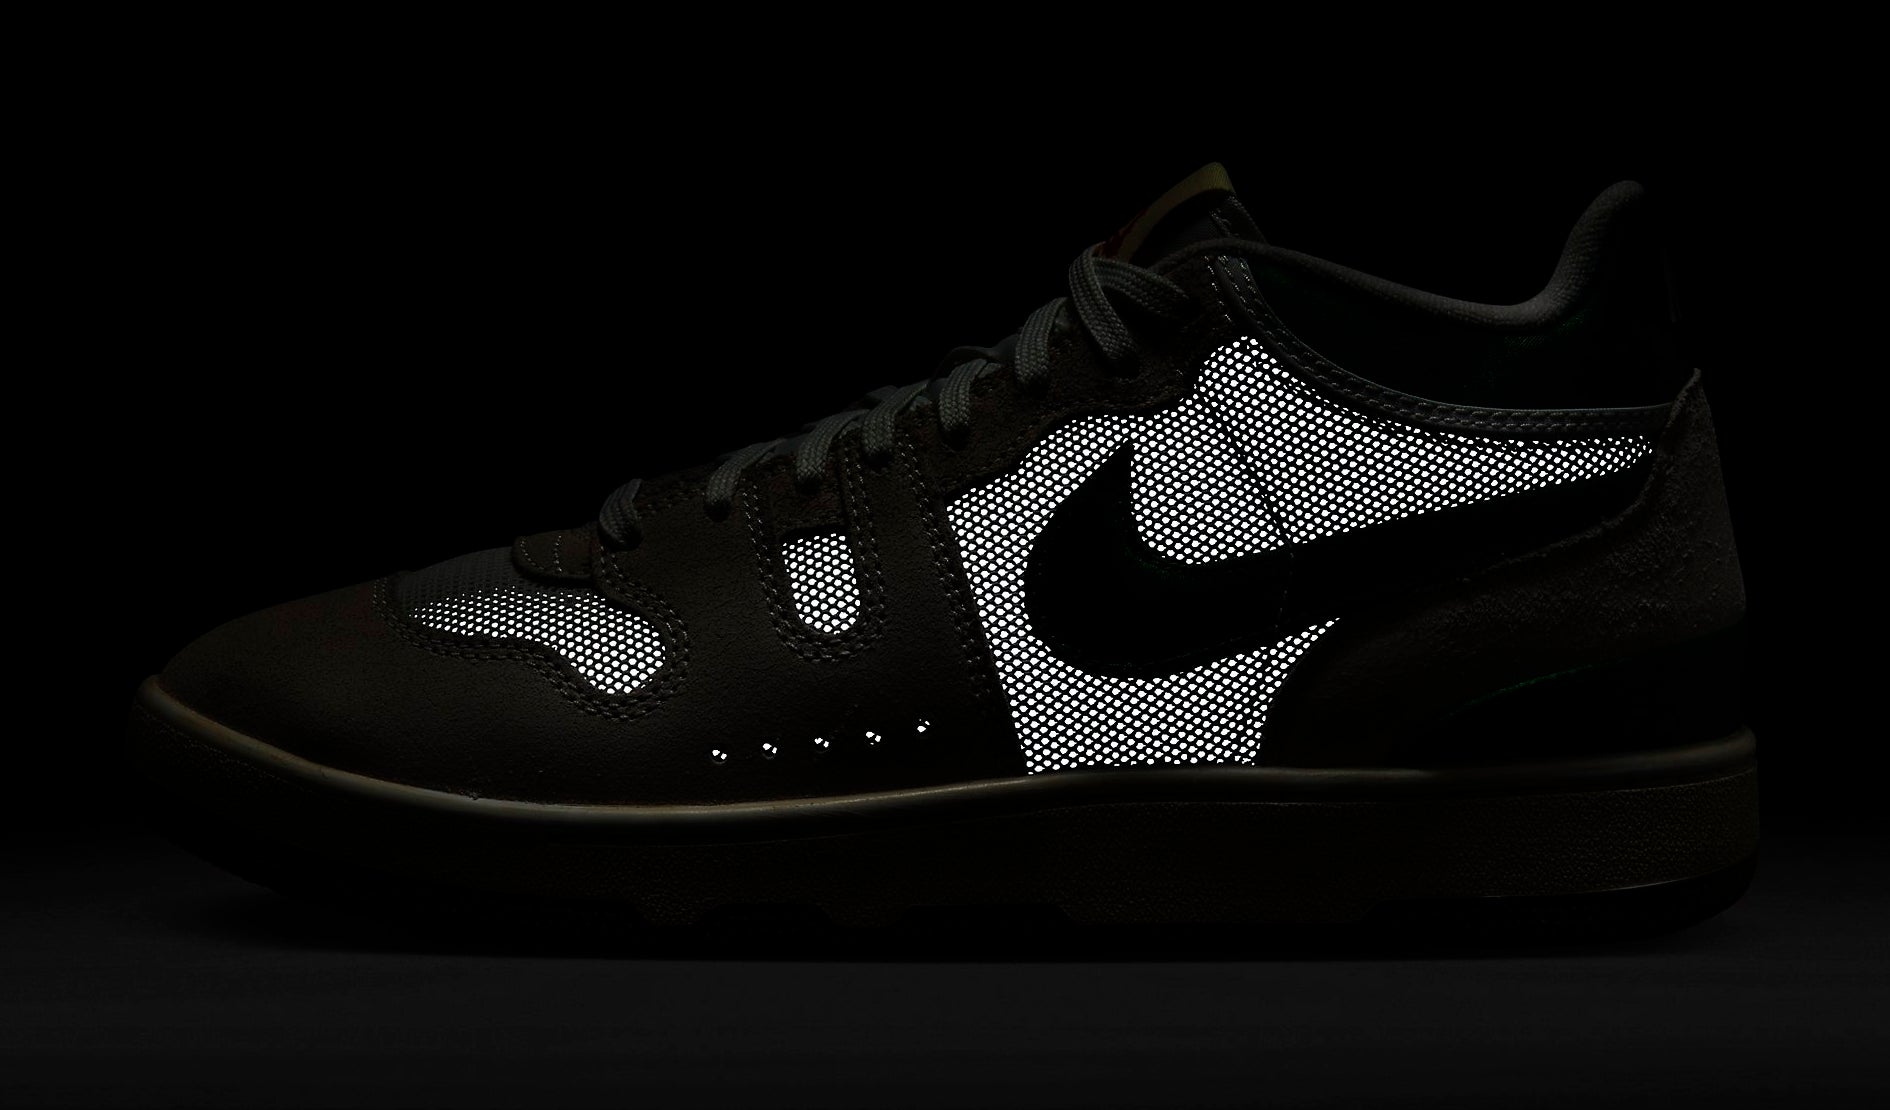 Social Status x Nike Mac Attack Social Currency Release Date DZ4636-102 3M Profile